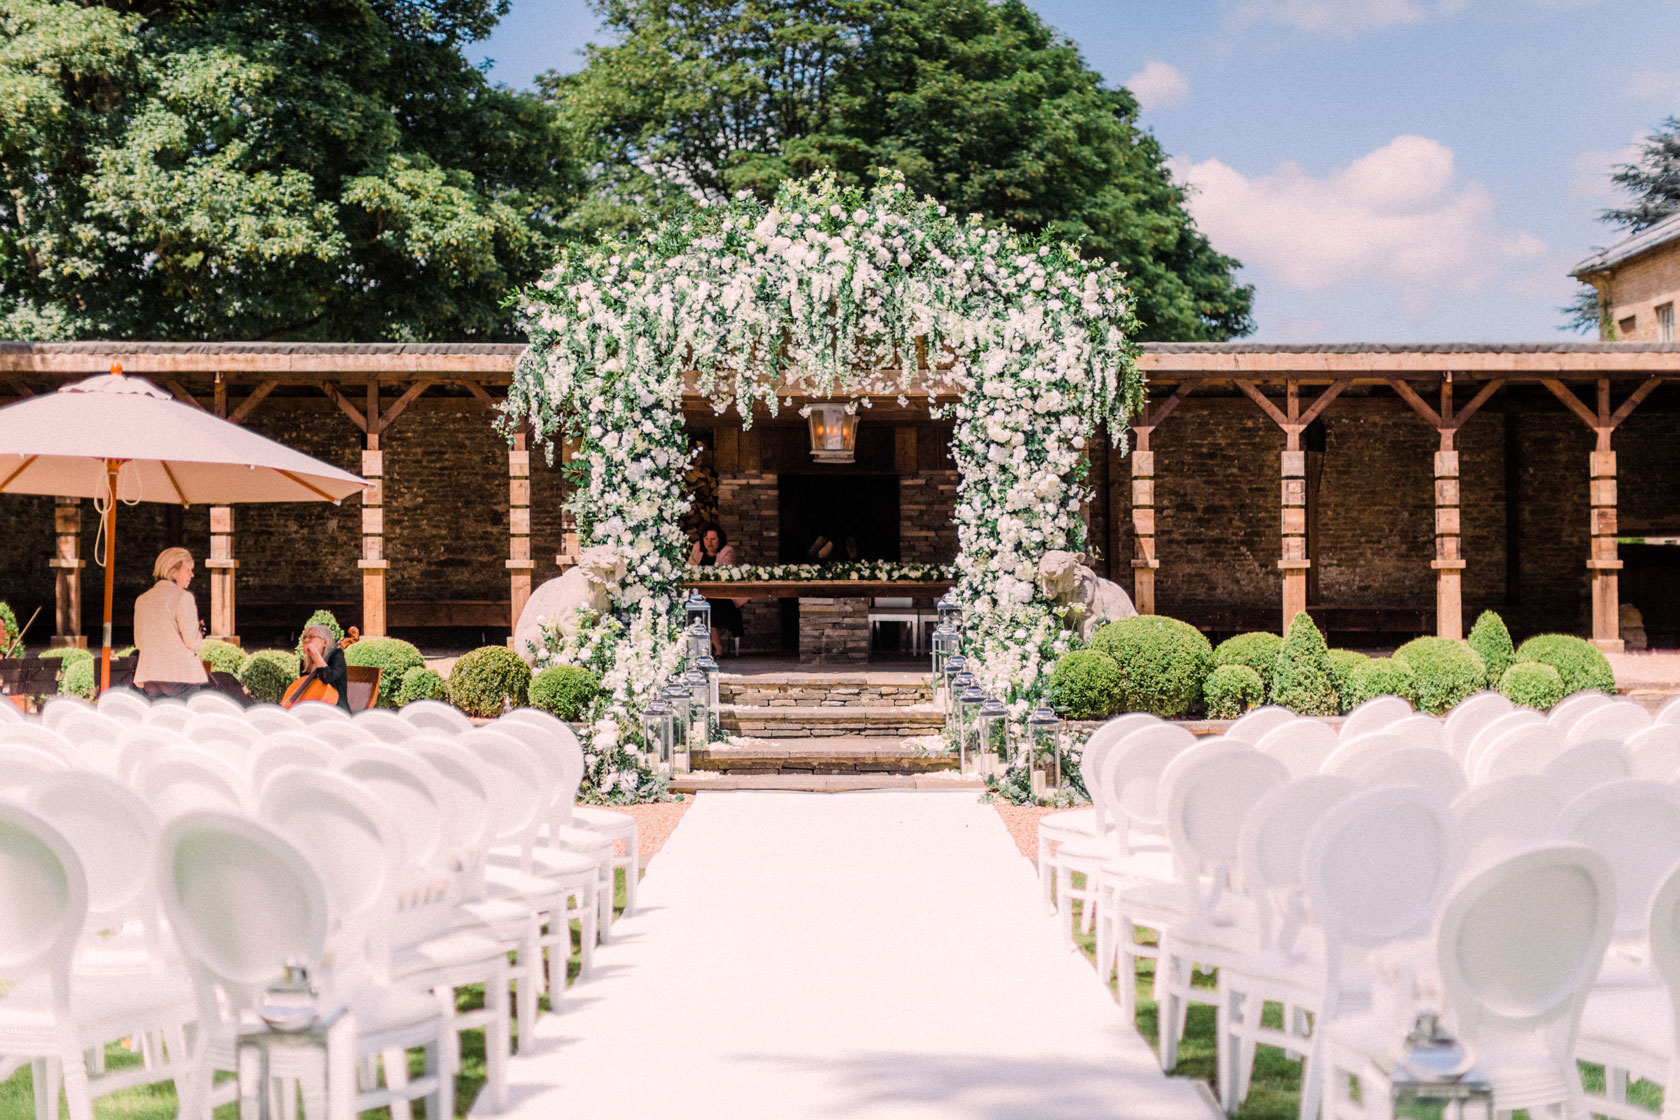 An outdoor ceremony flower arch by Amie Bone at Aynhoe Park